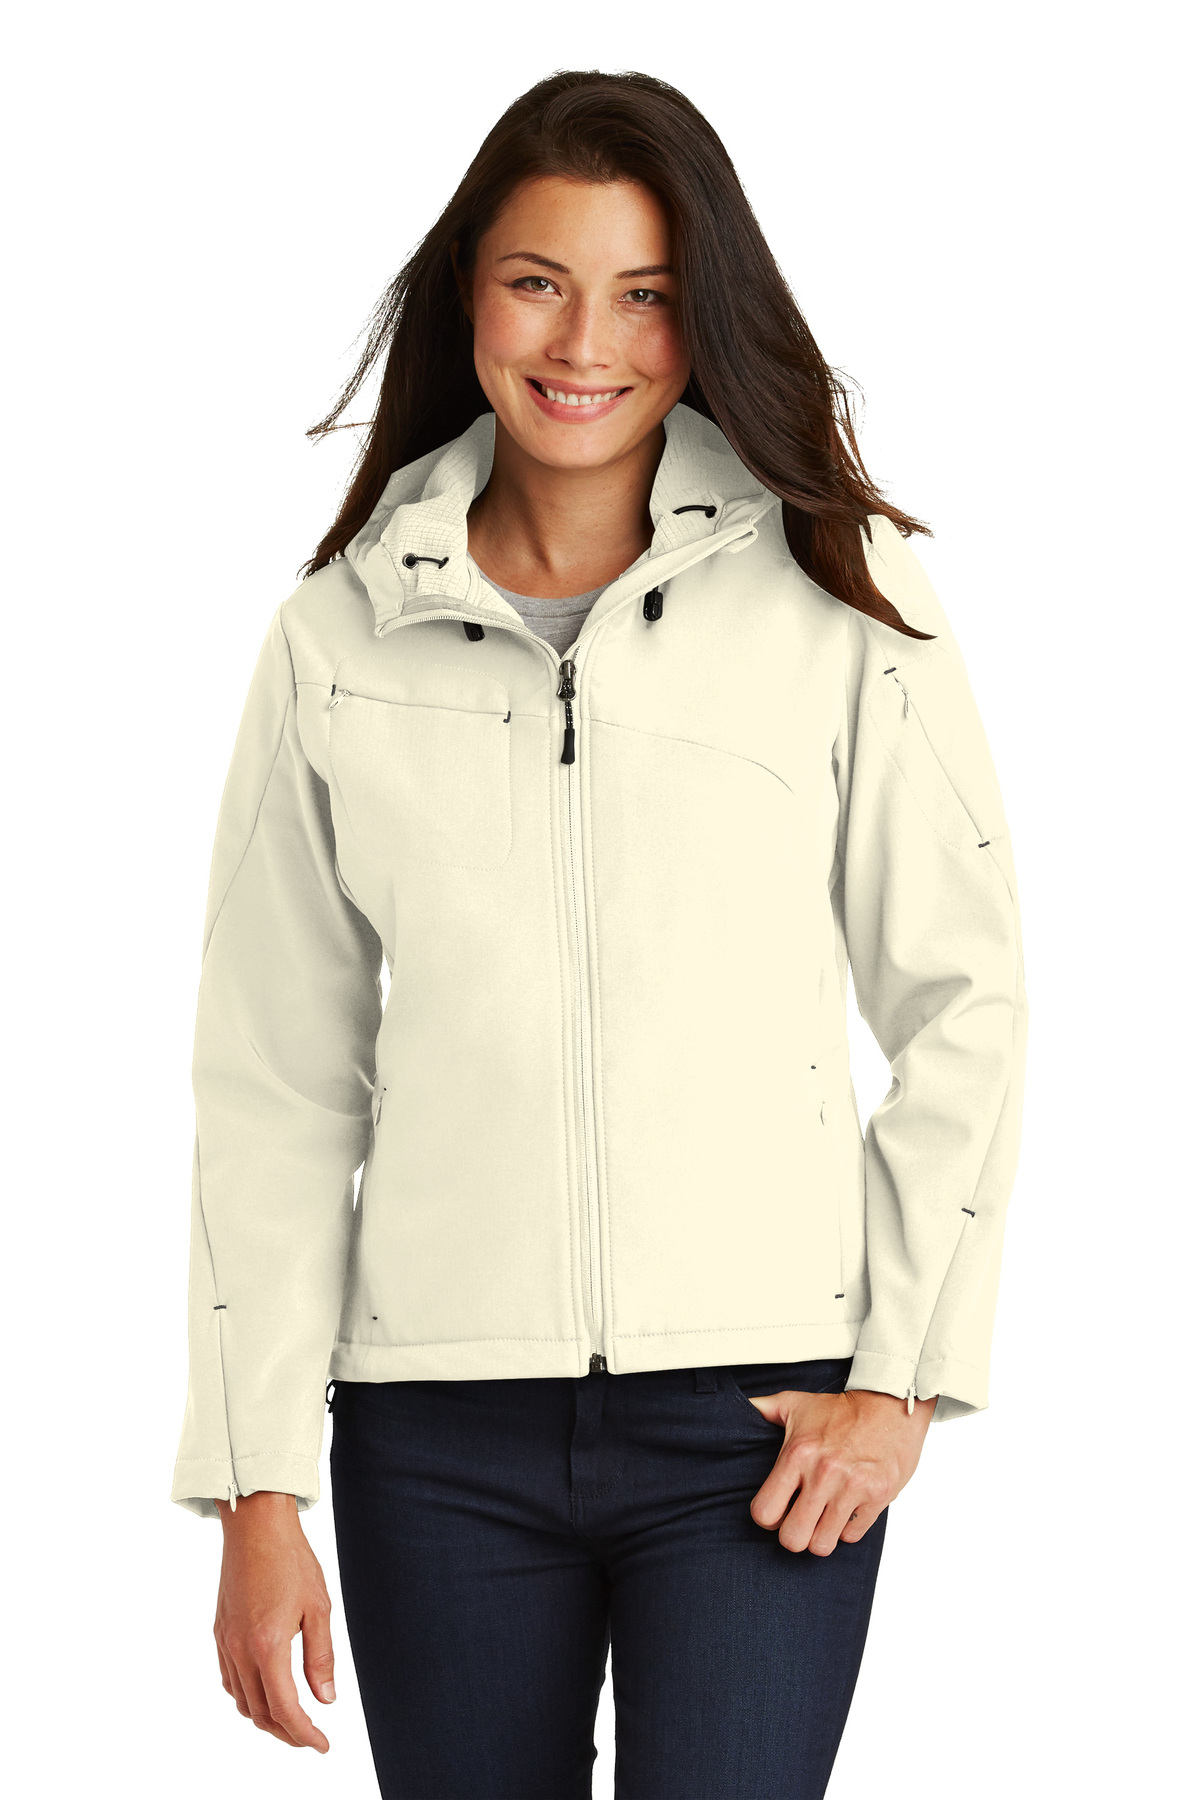 Port Authority Ladies Textured Hooded Soft Shell Jacket | Product | SanMar